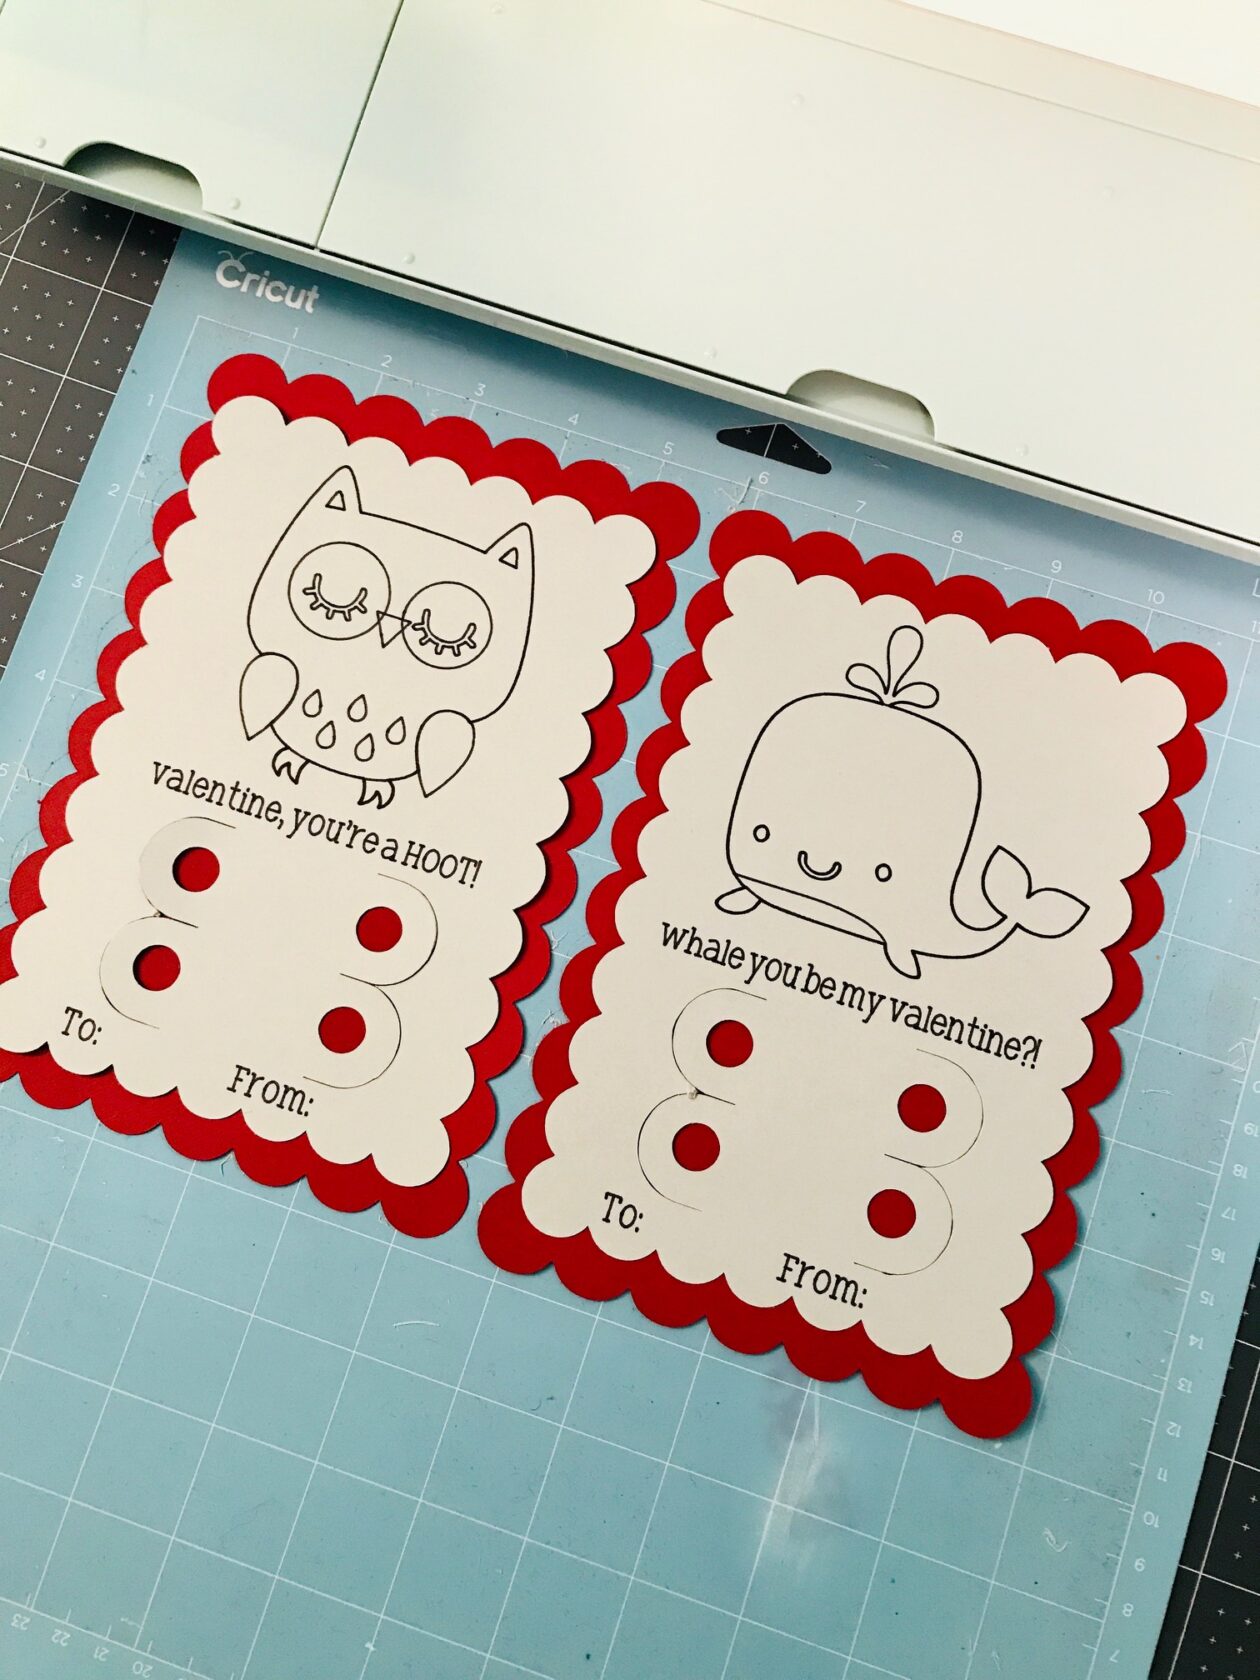 Cricut Valentine's Day Cards For Kids2